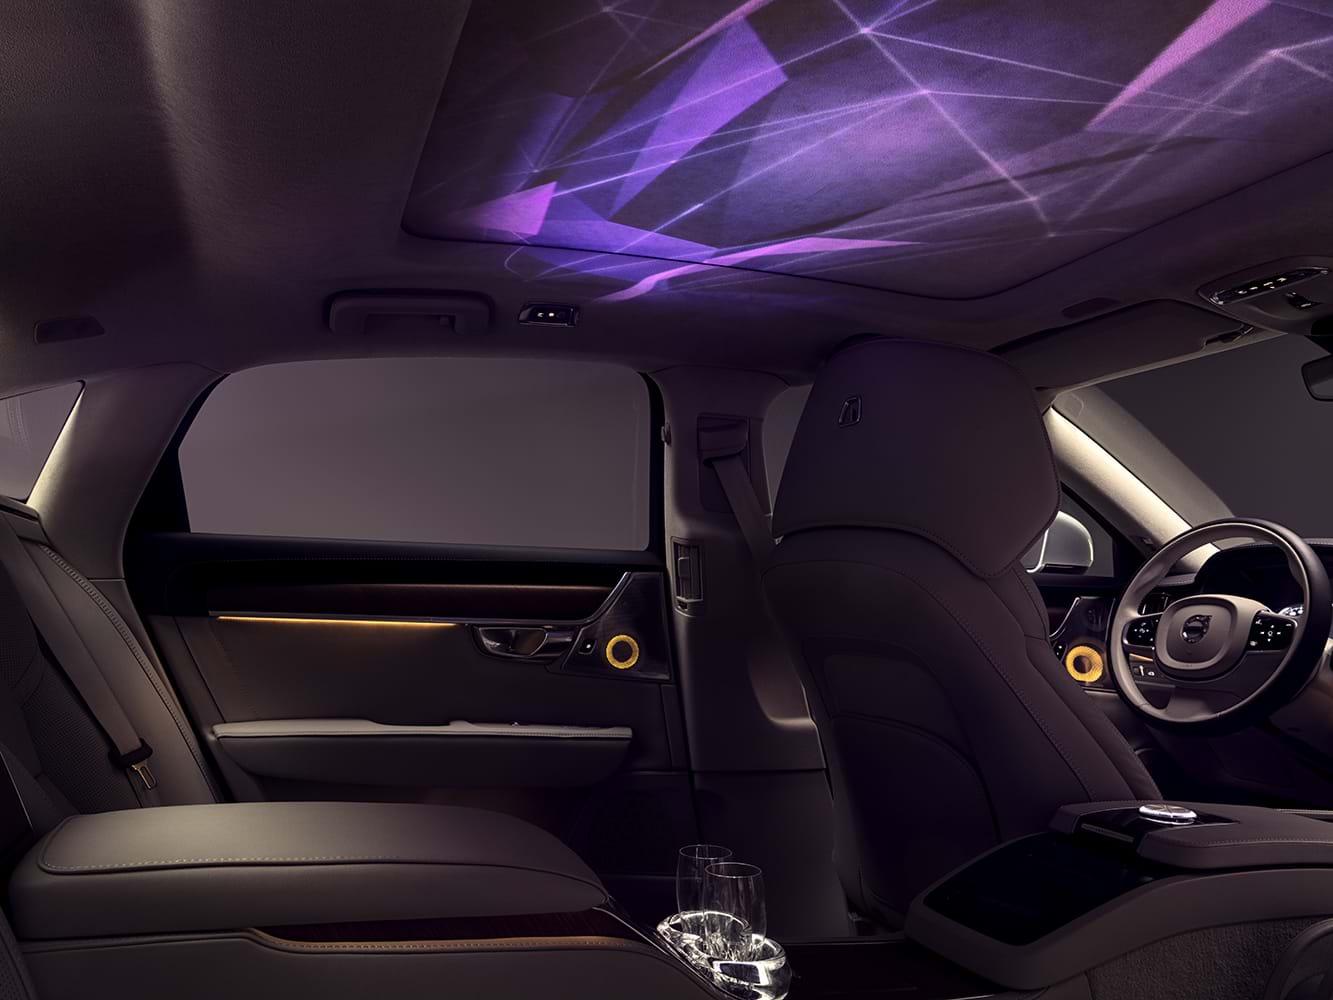  Interior of Volvo with an ambient light show projected onto interior roof